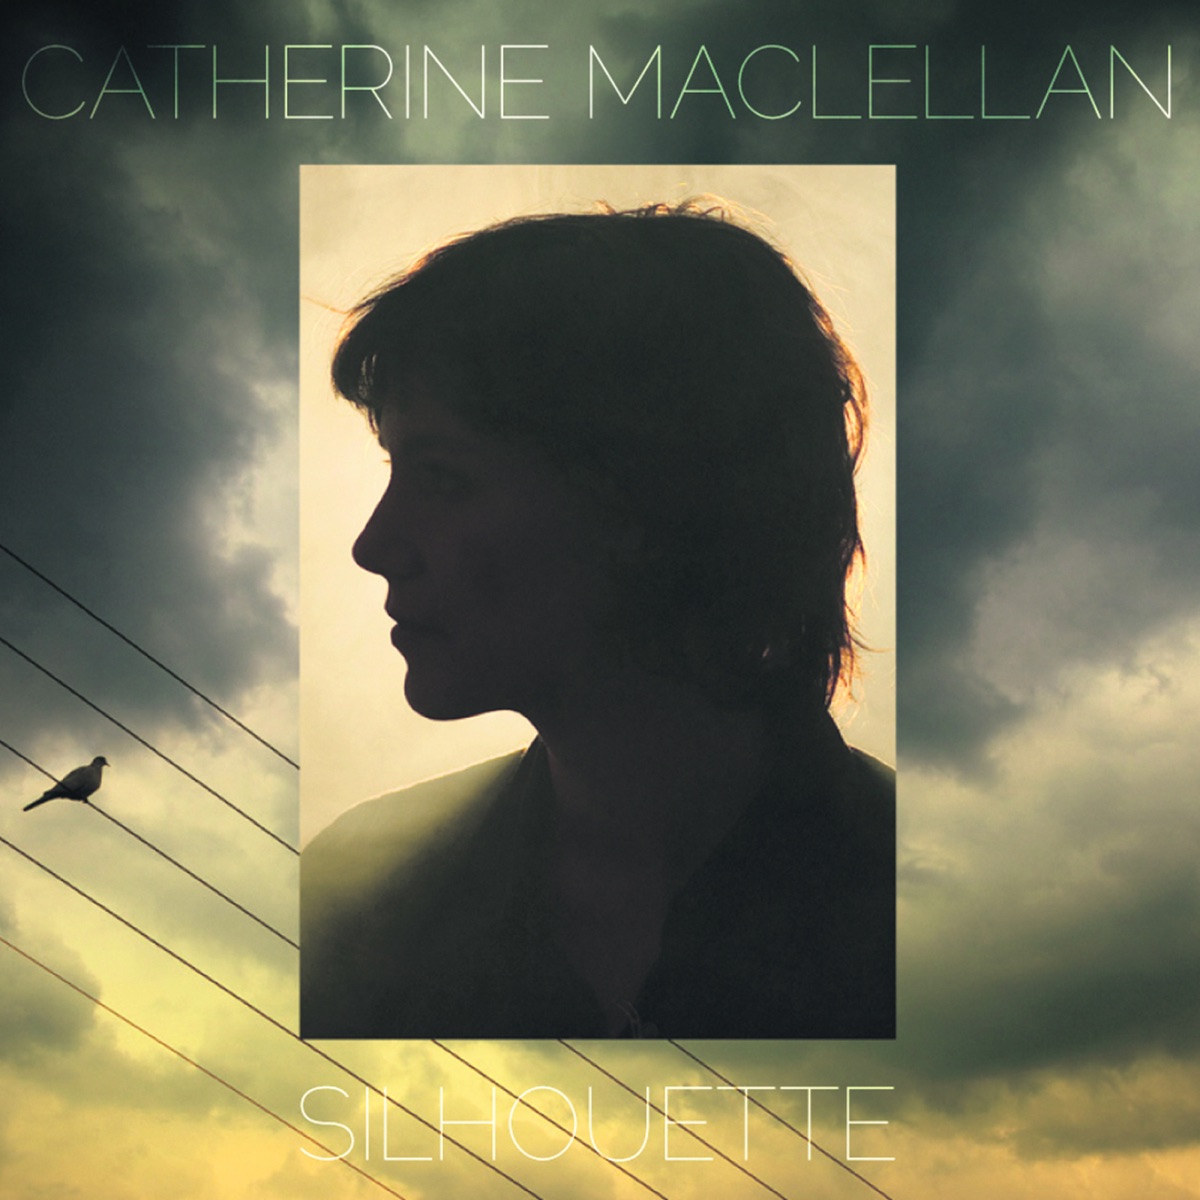 If It's Alright With You - The Songs of Gene MacLellan by Catherine  MacLellan on Apple Music